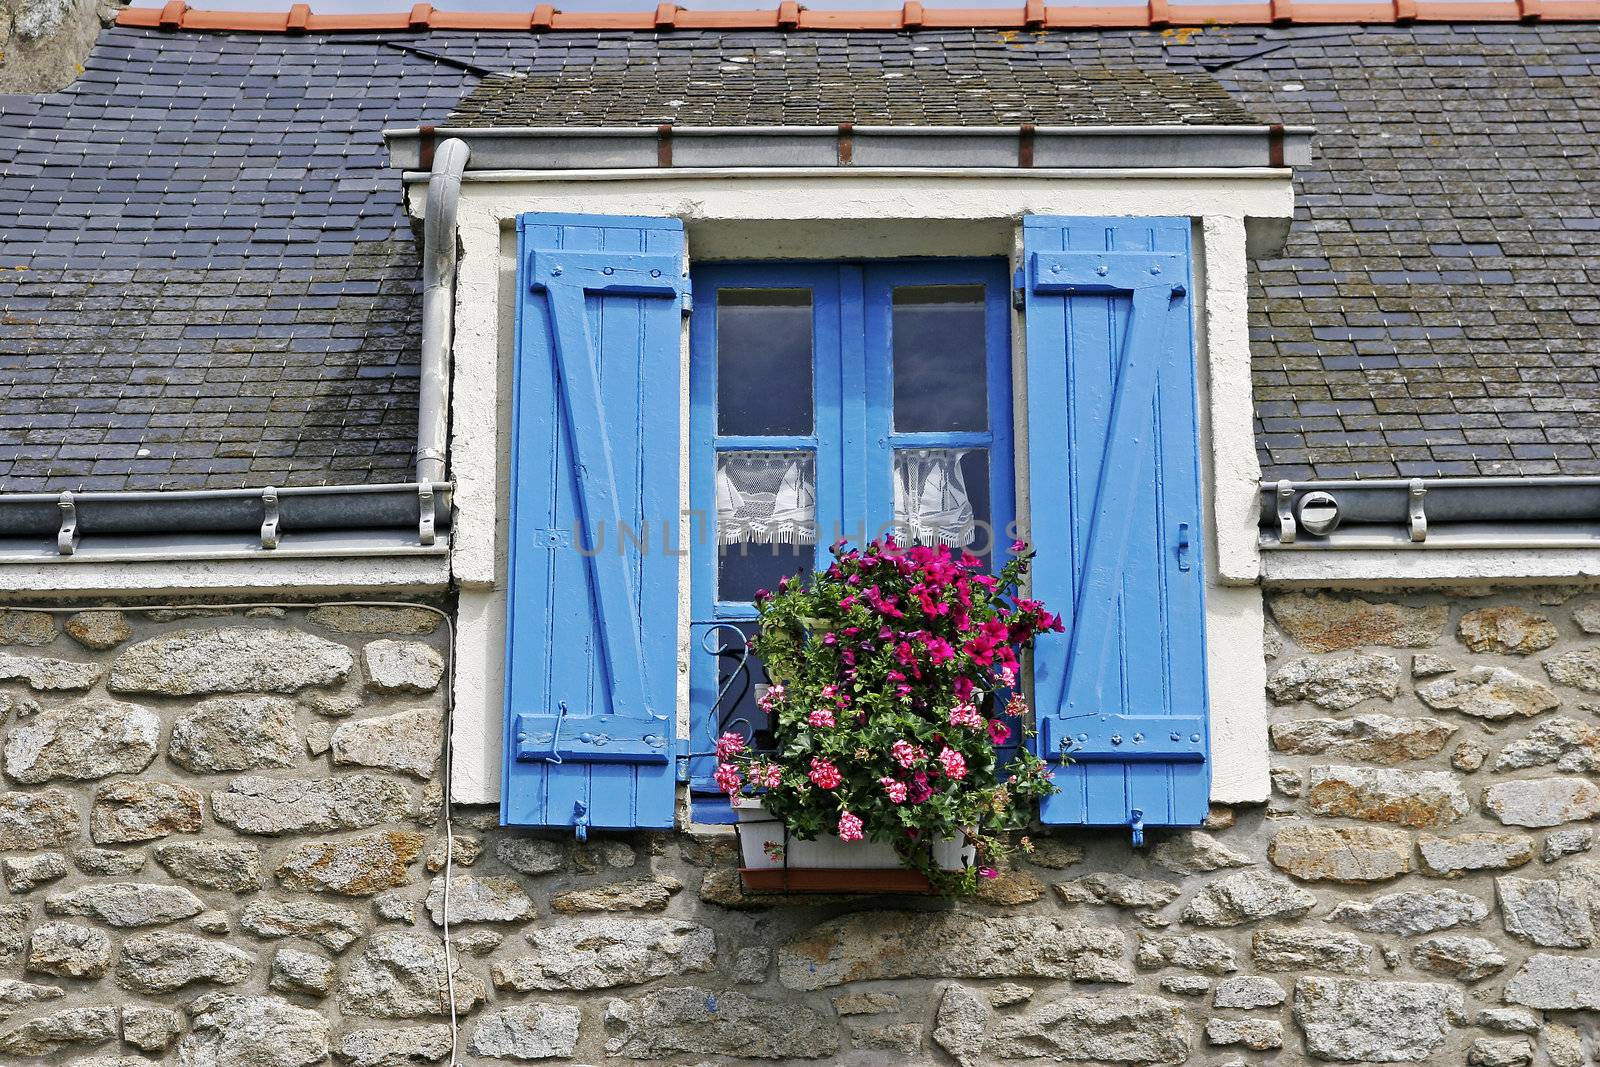 Plouharnel, House with blue window, Brittany by Natureandmore